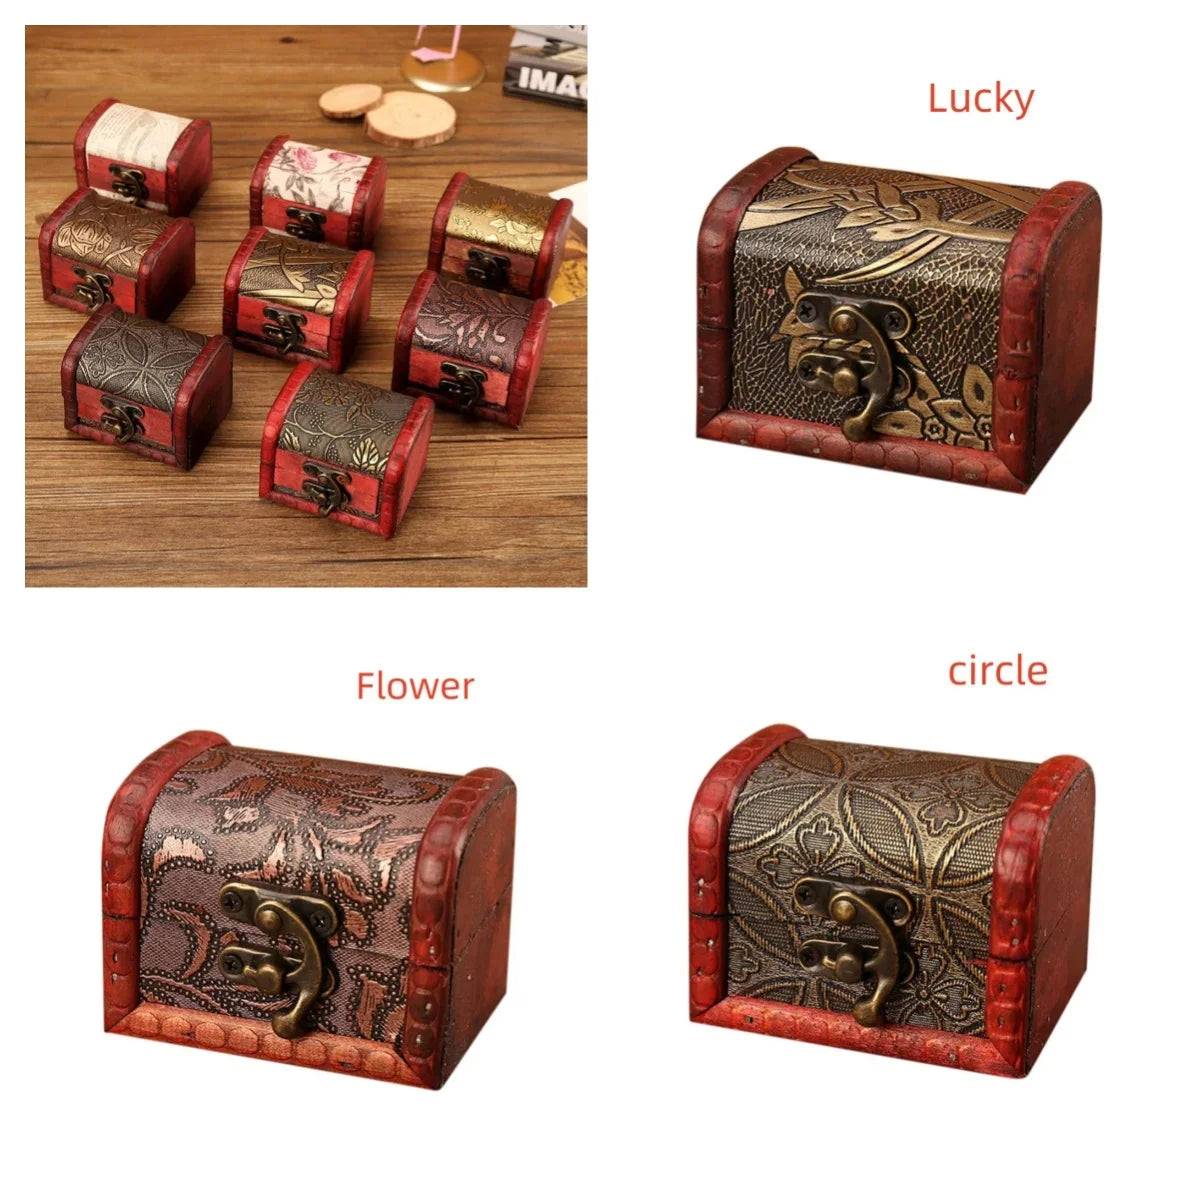 1PCS Small Vintage Jewelry Box Wooden Handmade Box With Mini Metal Lock For Storing Jewelry Treasure Pearl